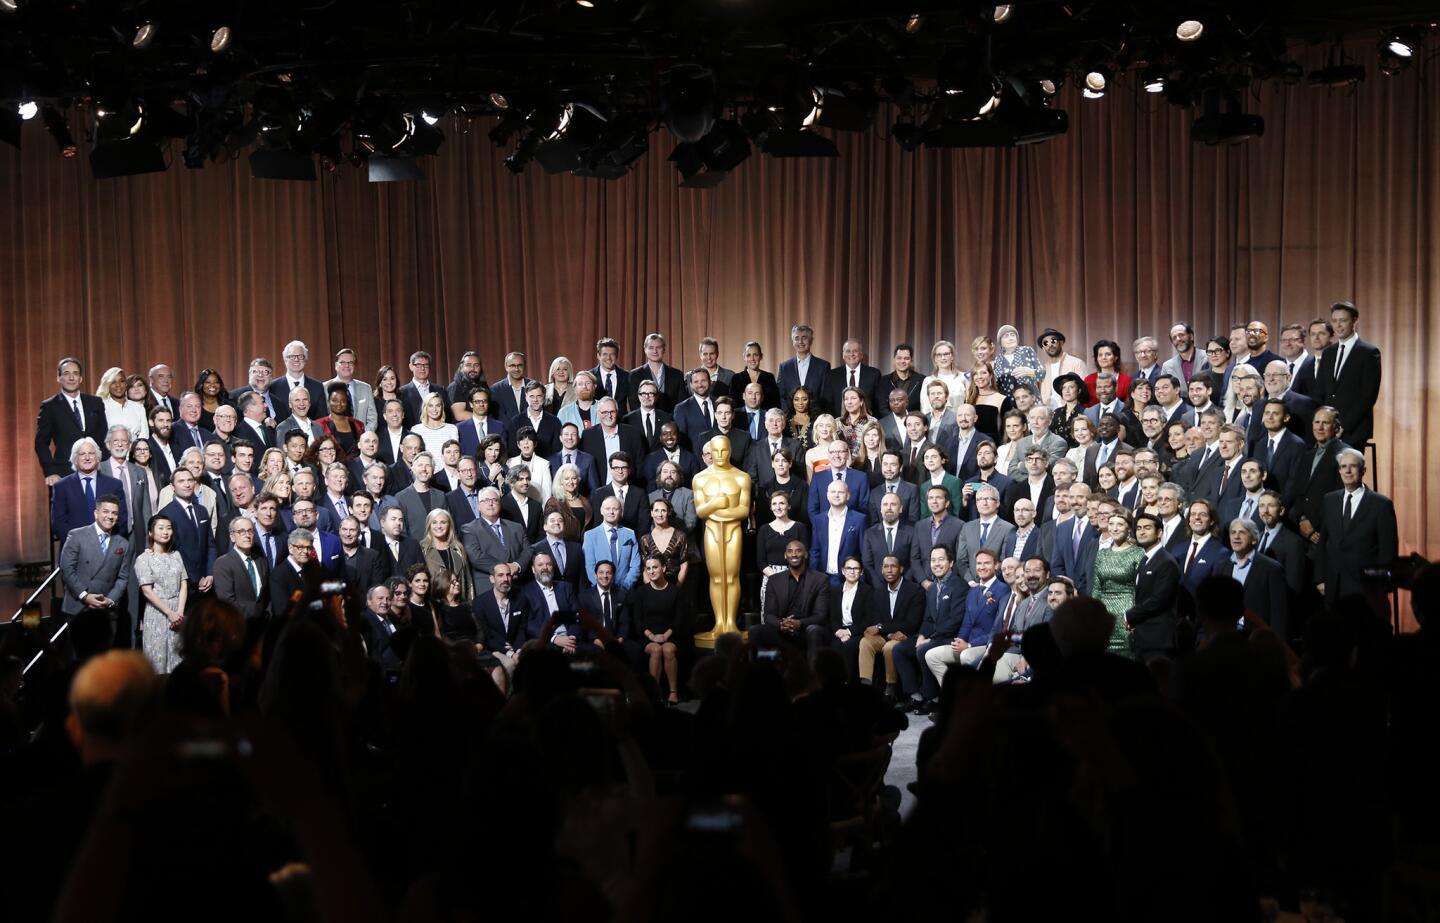 For Oscar nominees, it's time to dine